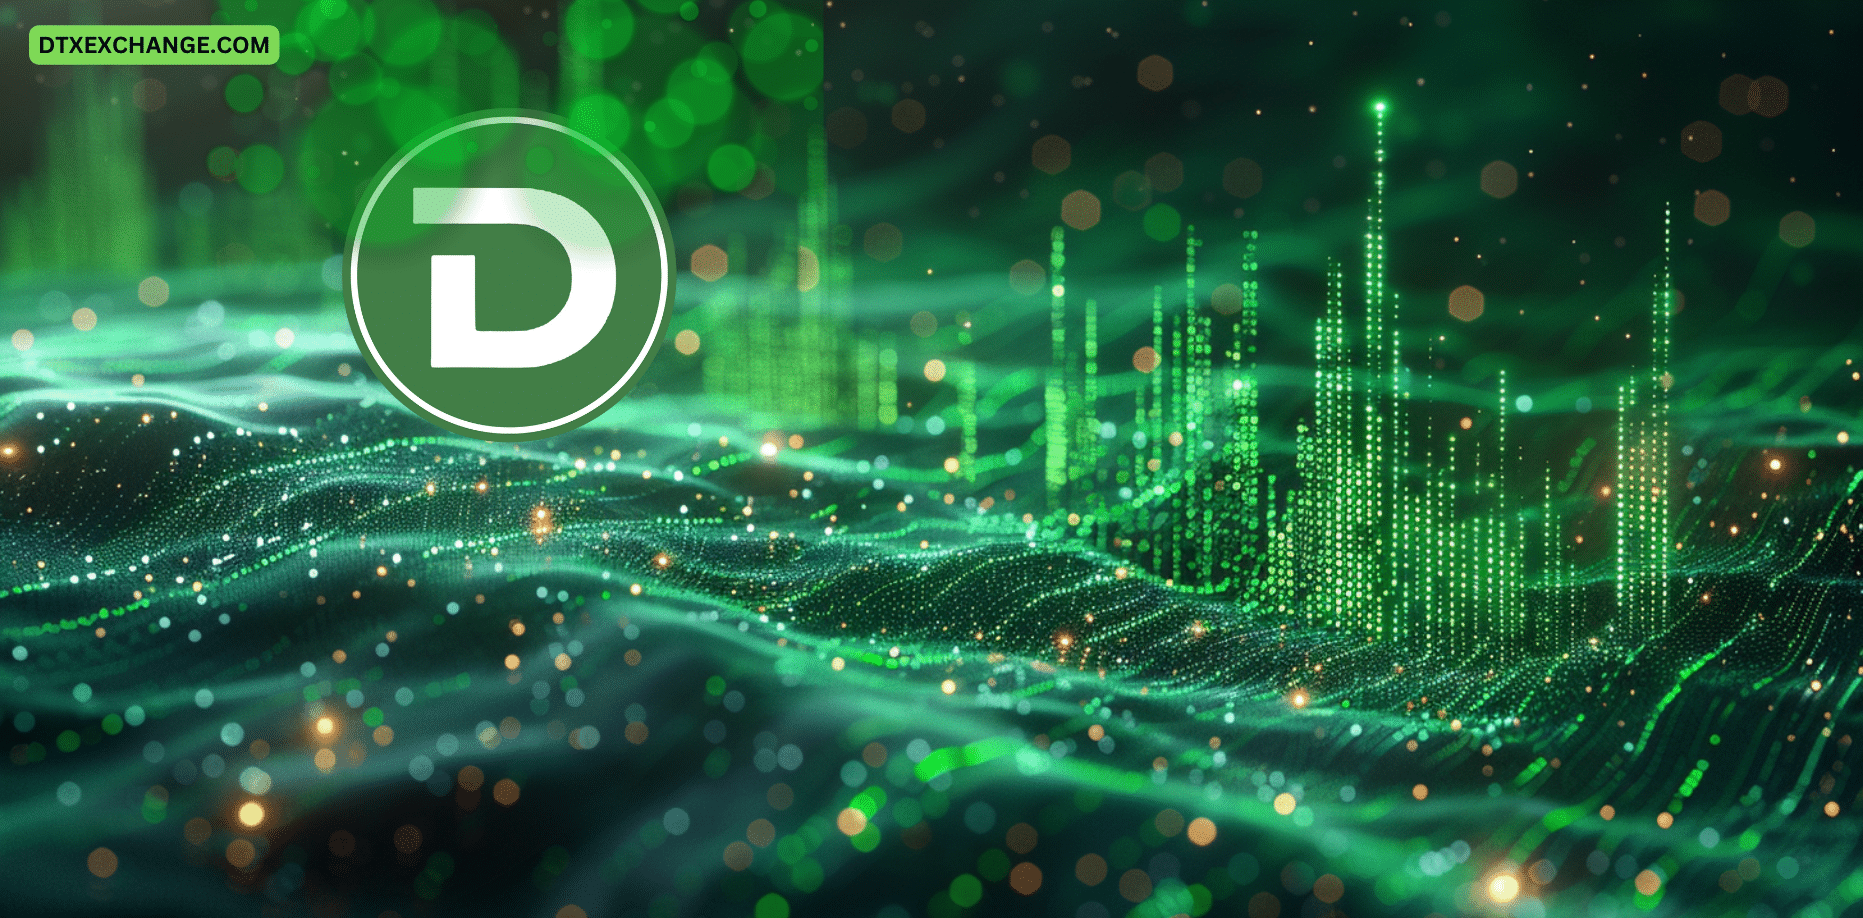 DTX Hybrid Trading Features Outshine BTC Transaction Fees & LTC Price